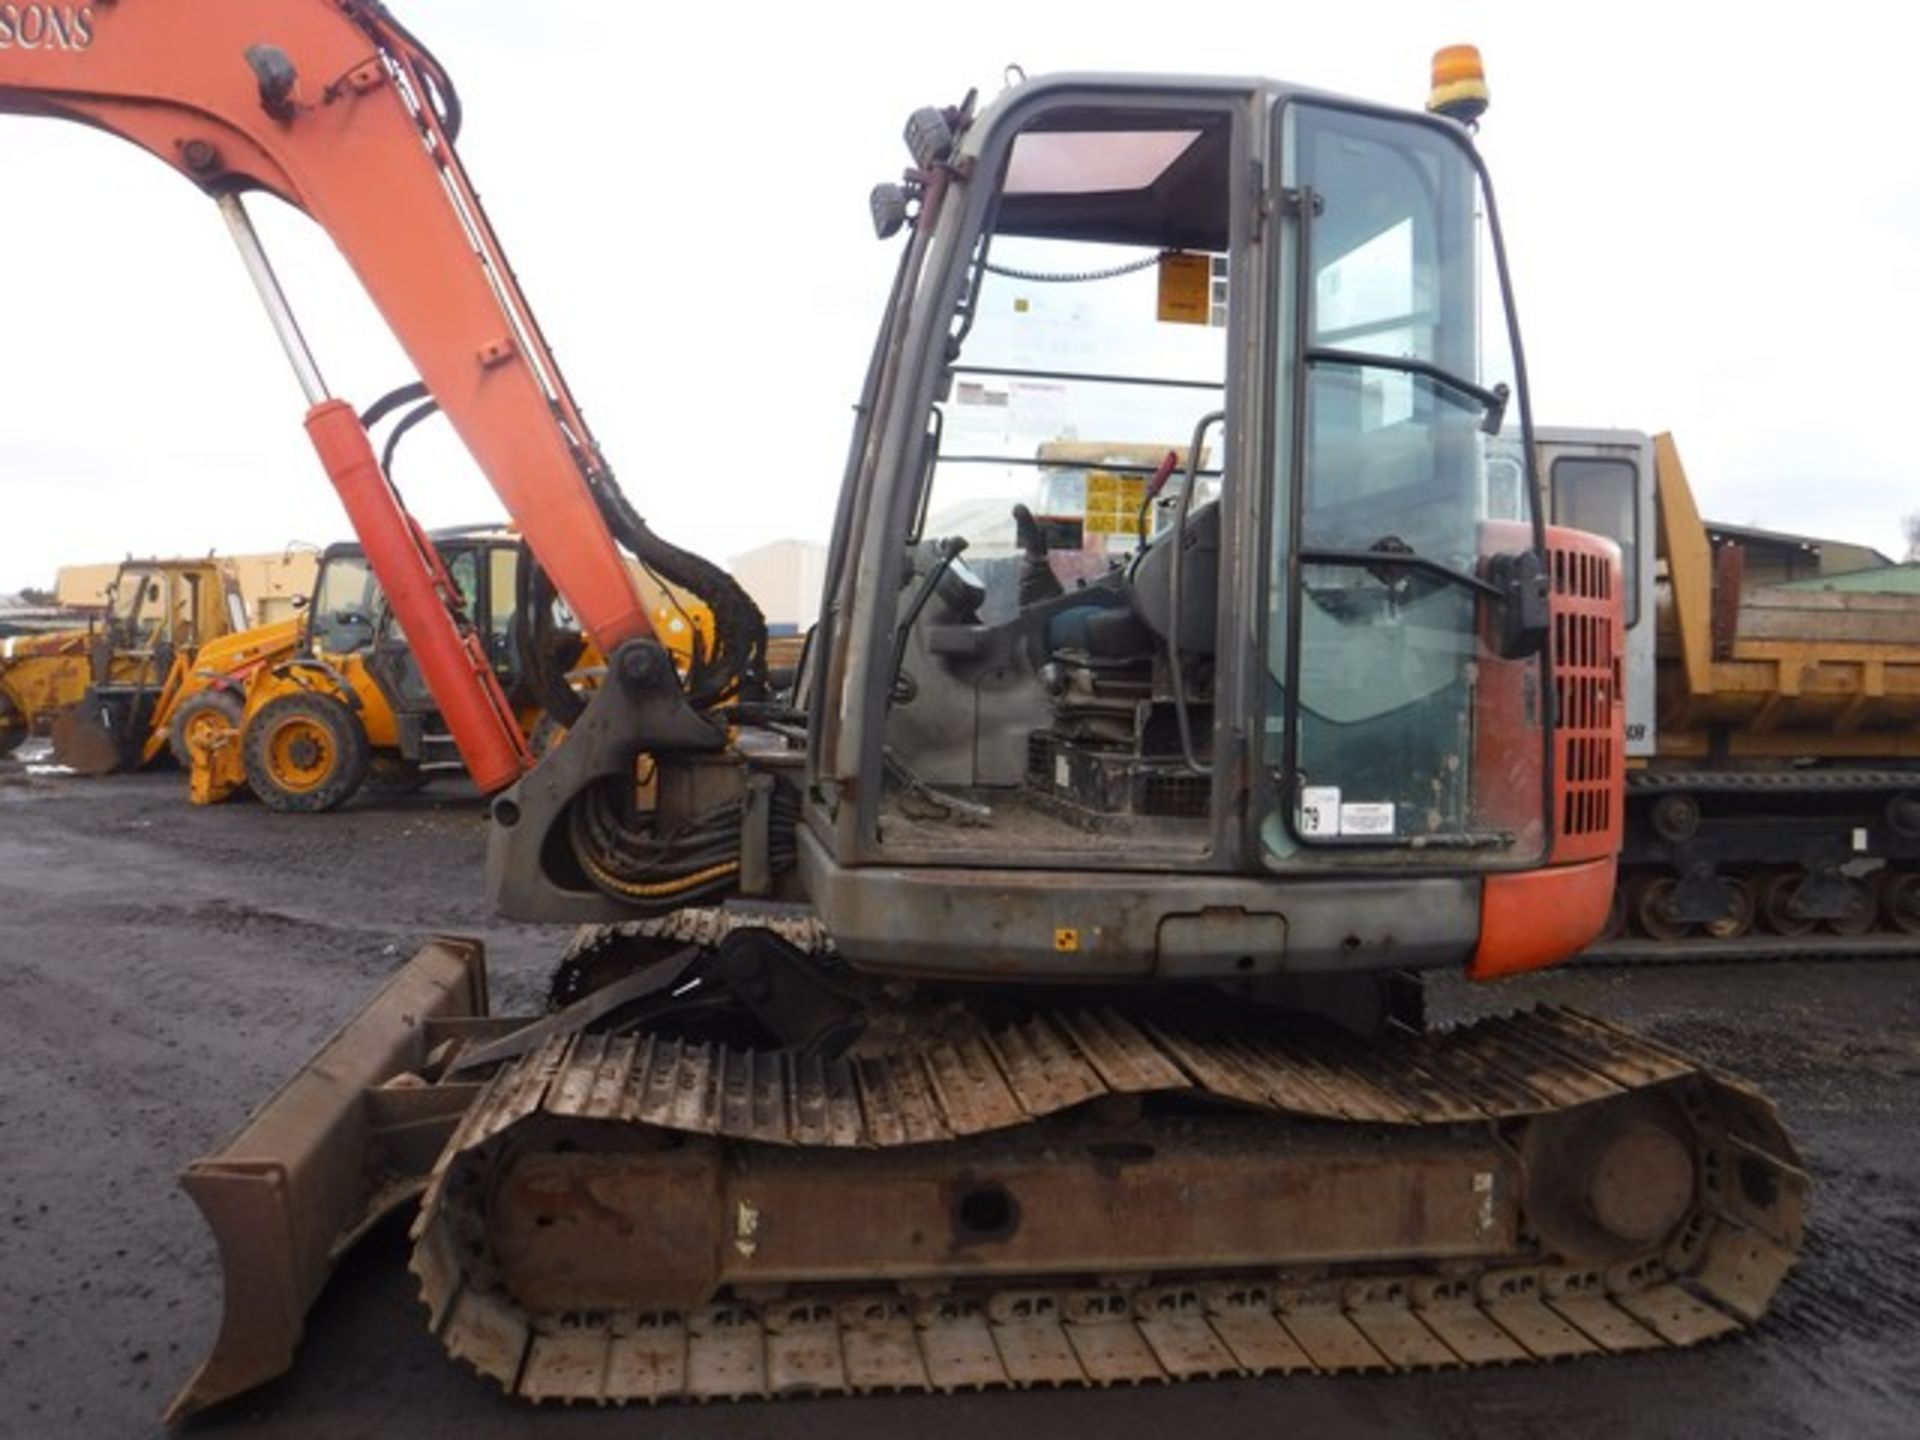 2009 HITACHI 360 EXCAVATOR ZAXIS 85 C/W 3 BUCKETS AND QUICK HITCH 6441HRS (NOT VERIFIED) - Image 25 of 27